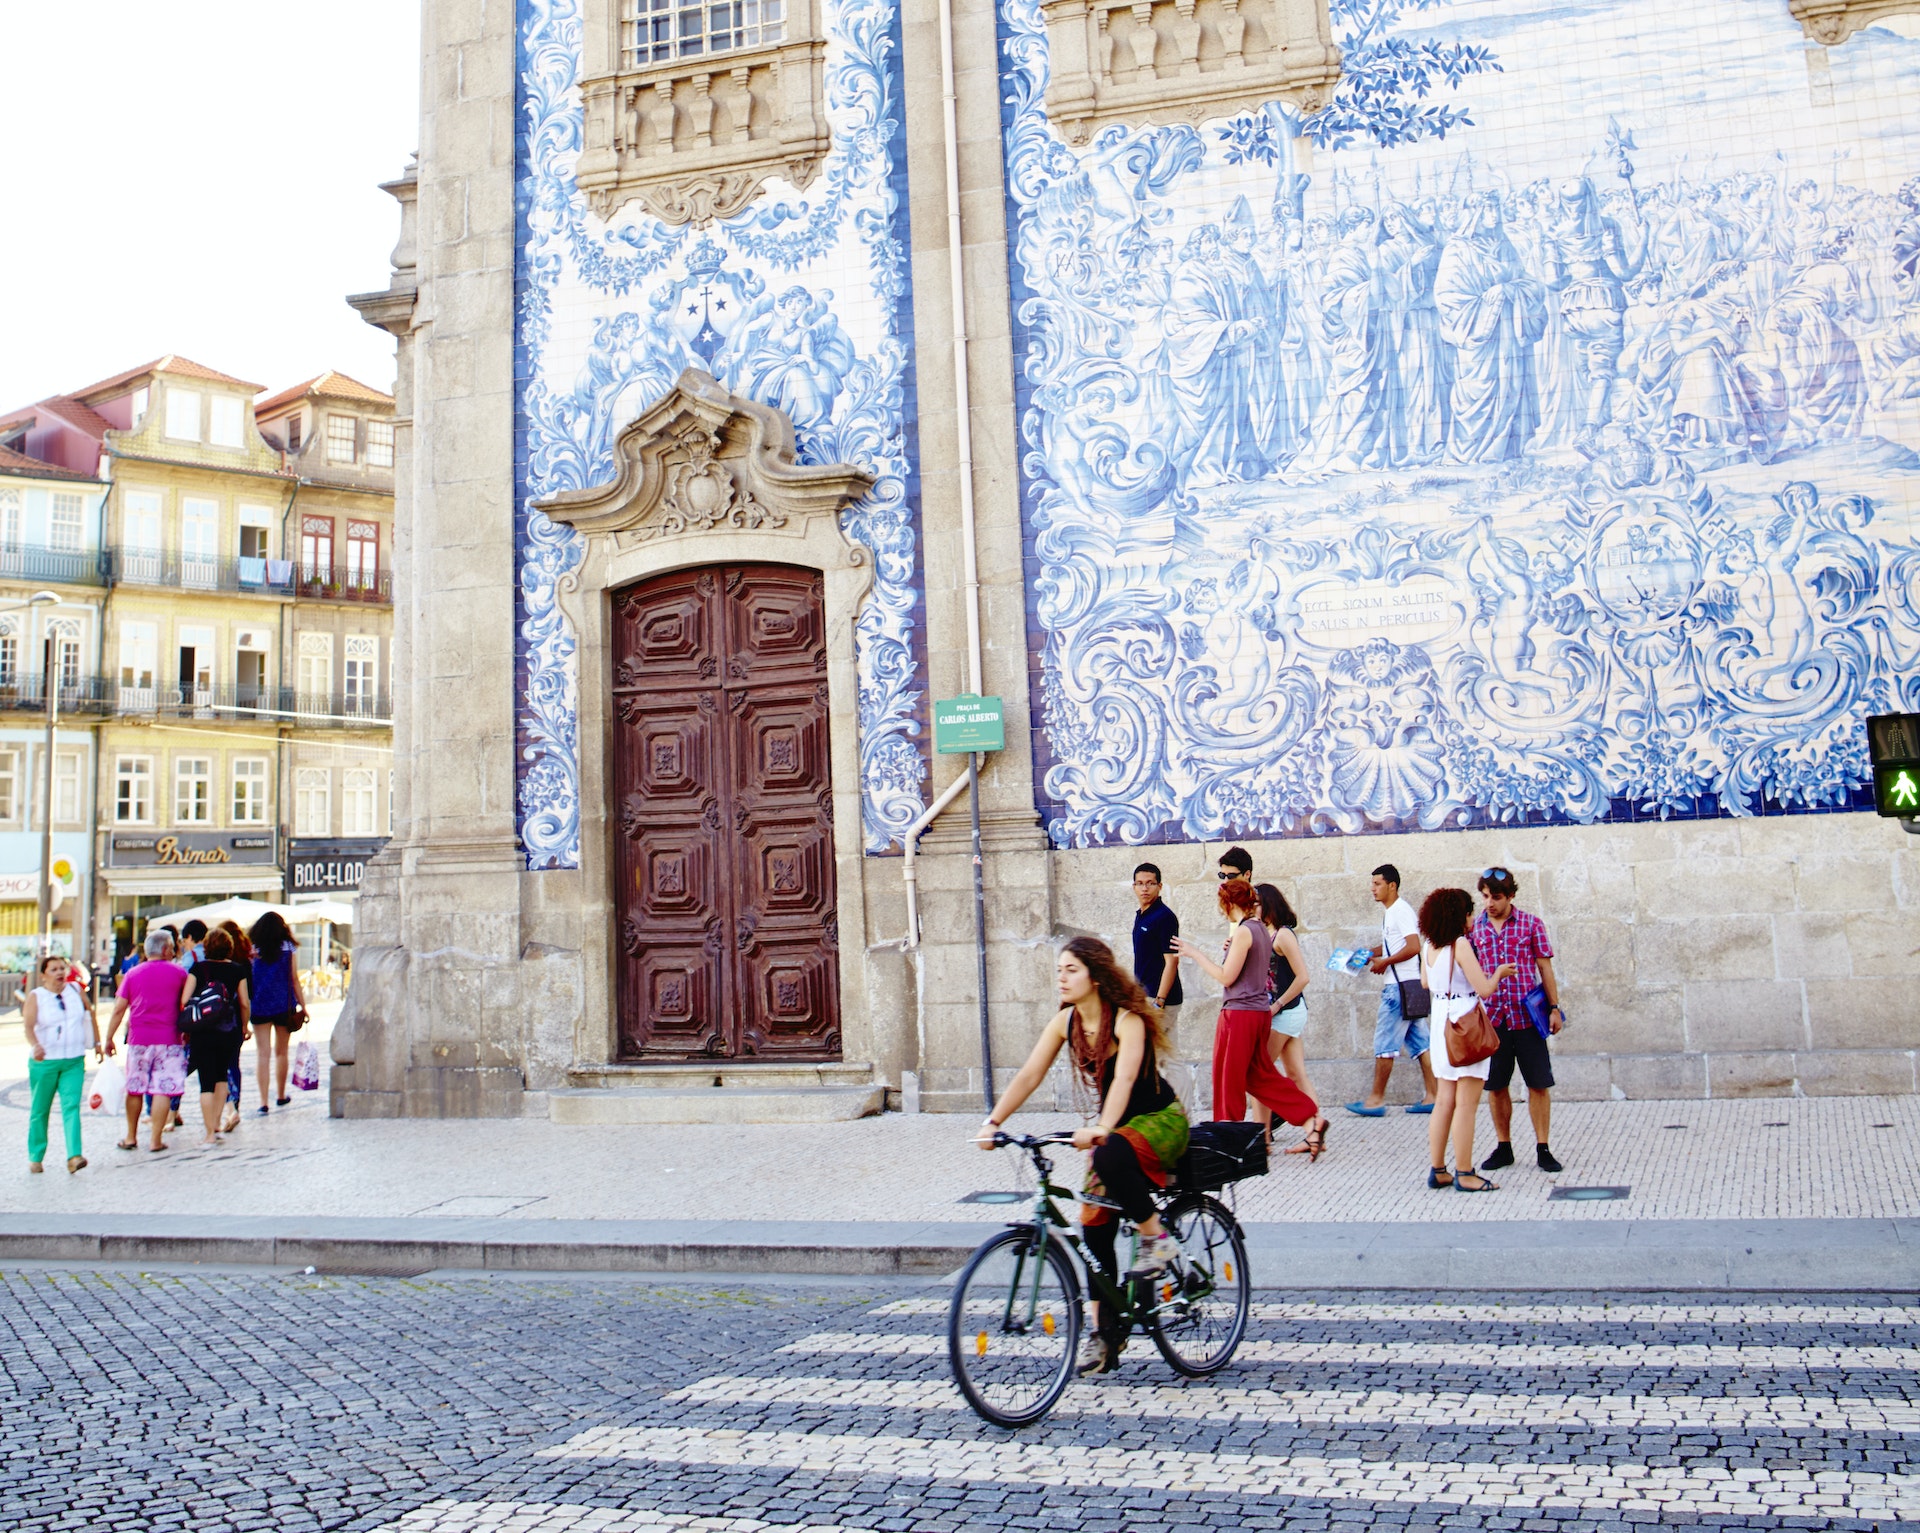 A street scene in Porto with a church wall covered in blue and white tiles in the background